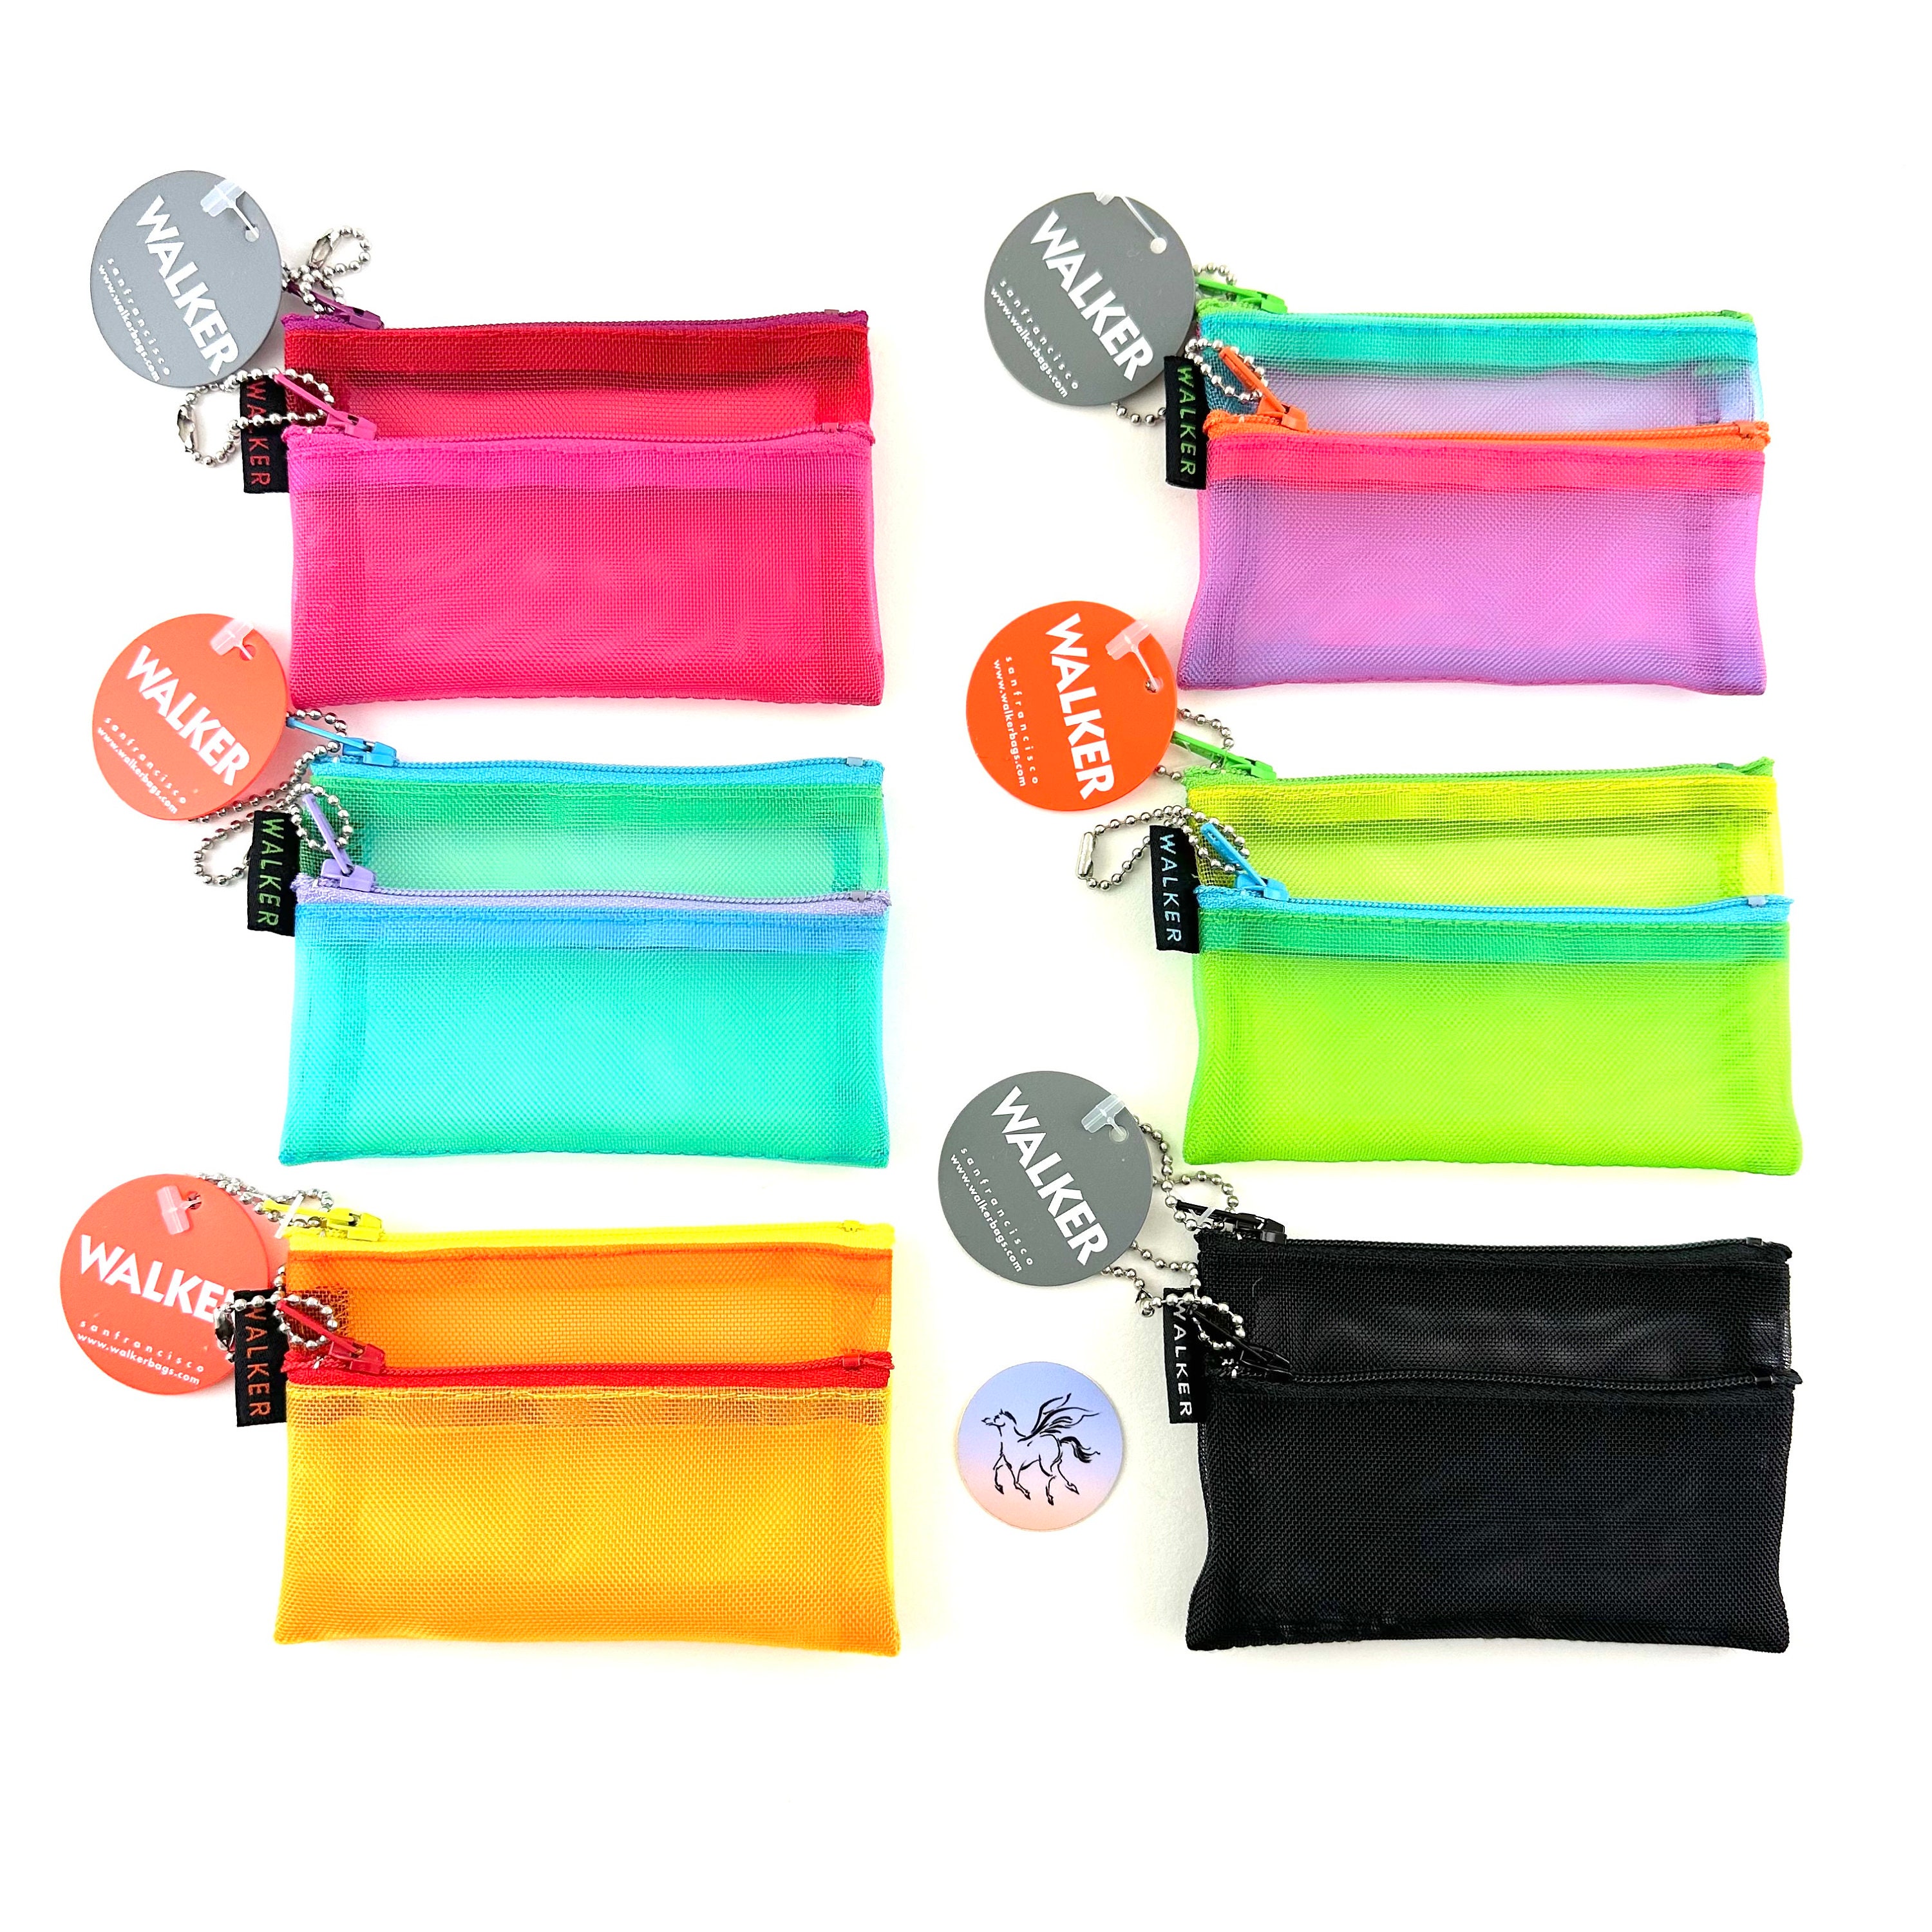 Walker Mesh Zip Notions Bag Small Notions Bag With Key Ring 3 X 4 See  Through Notions Key Chain Bag in A Variety of Colors Zipper Mesh Bag 